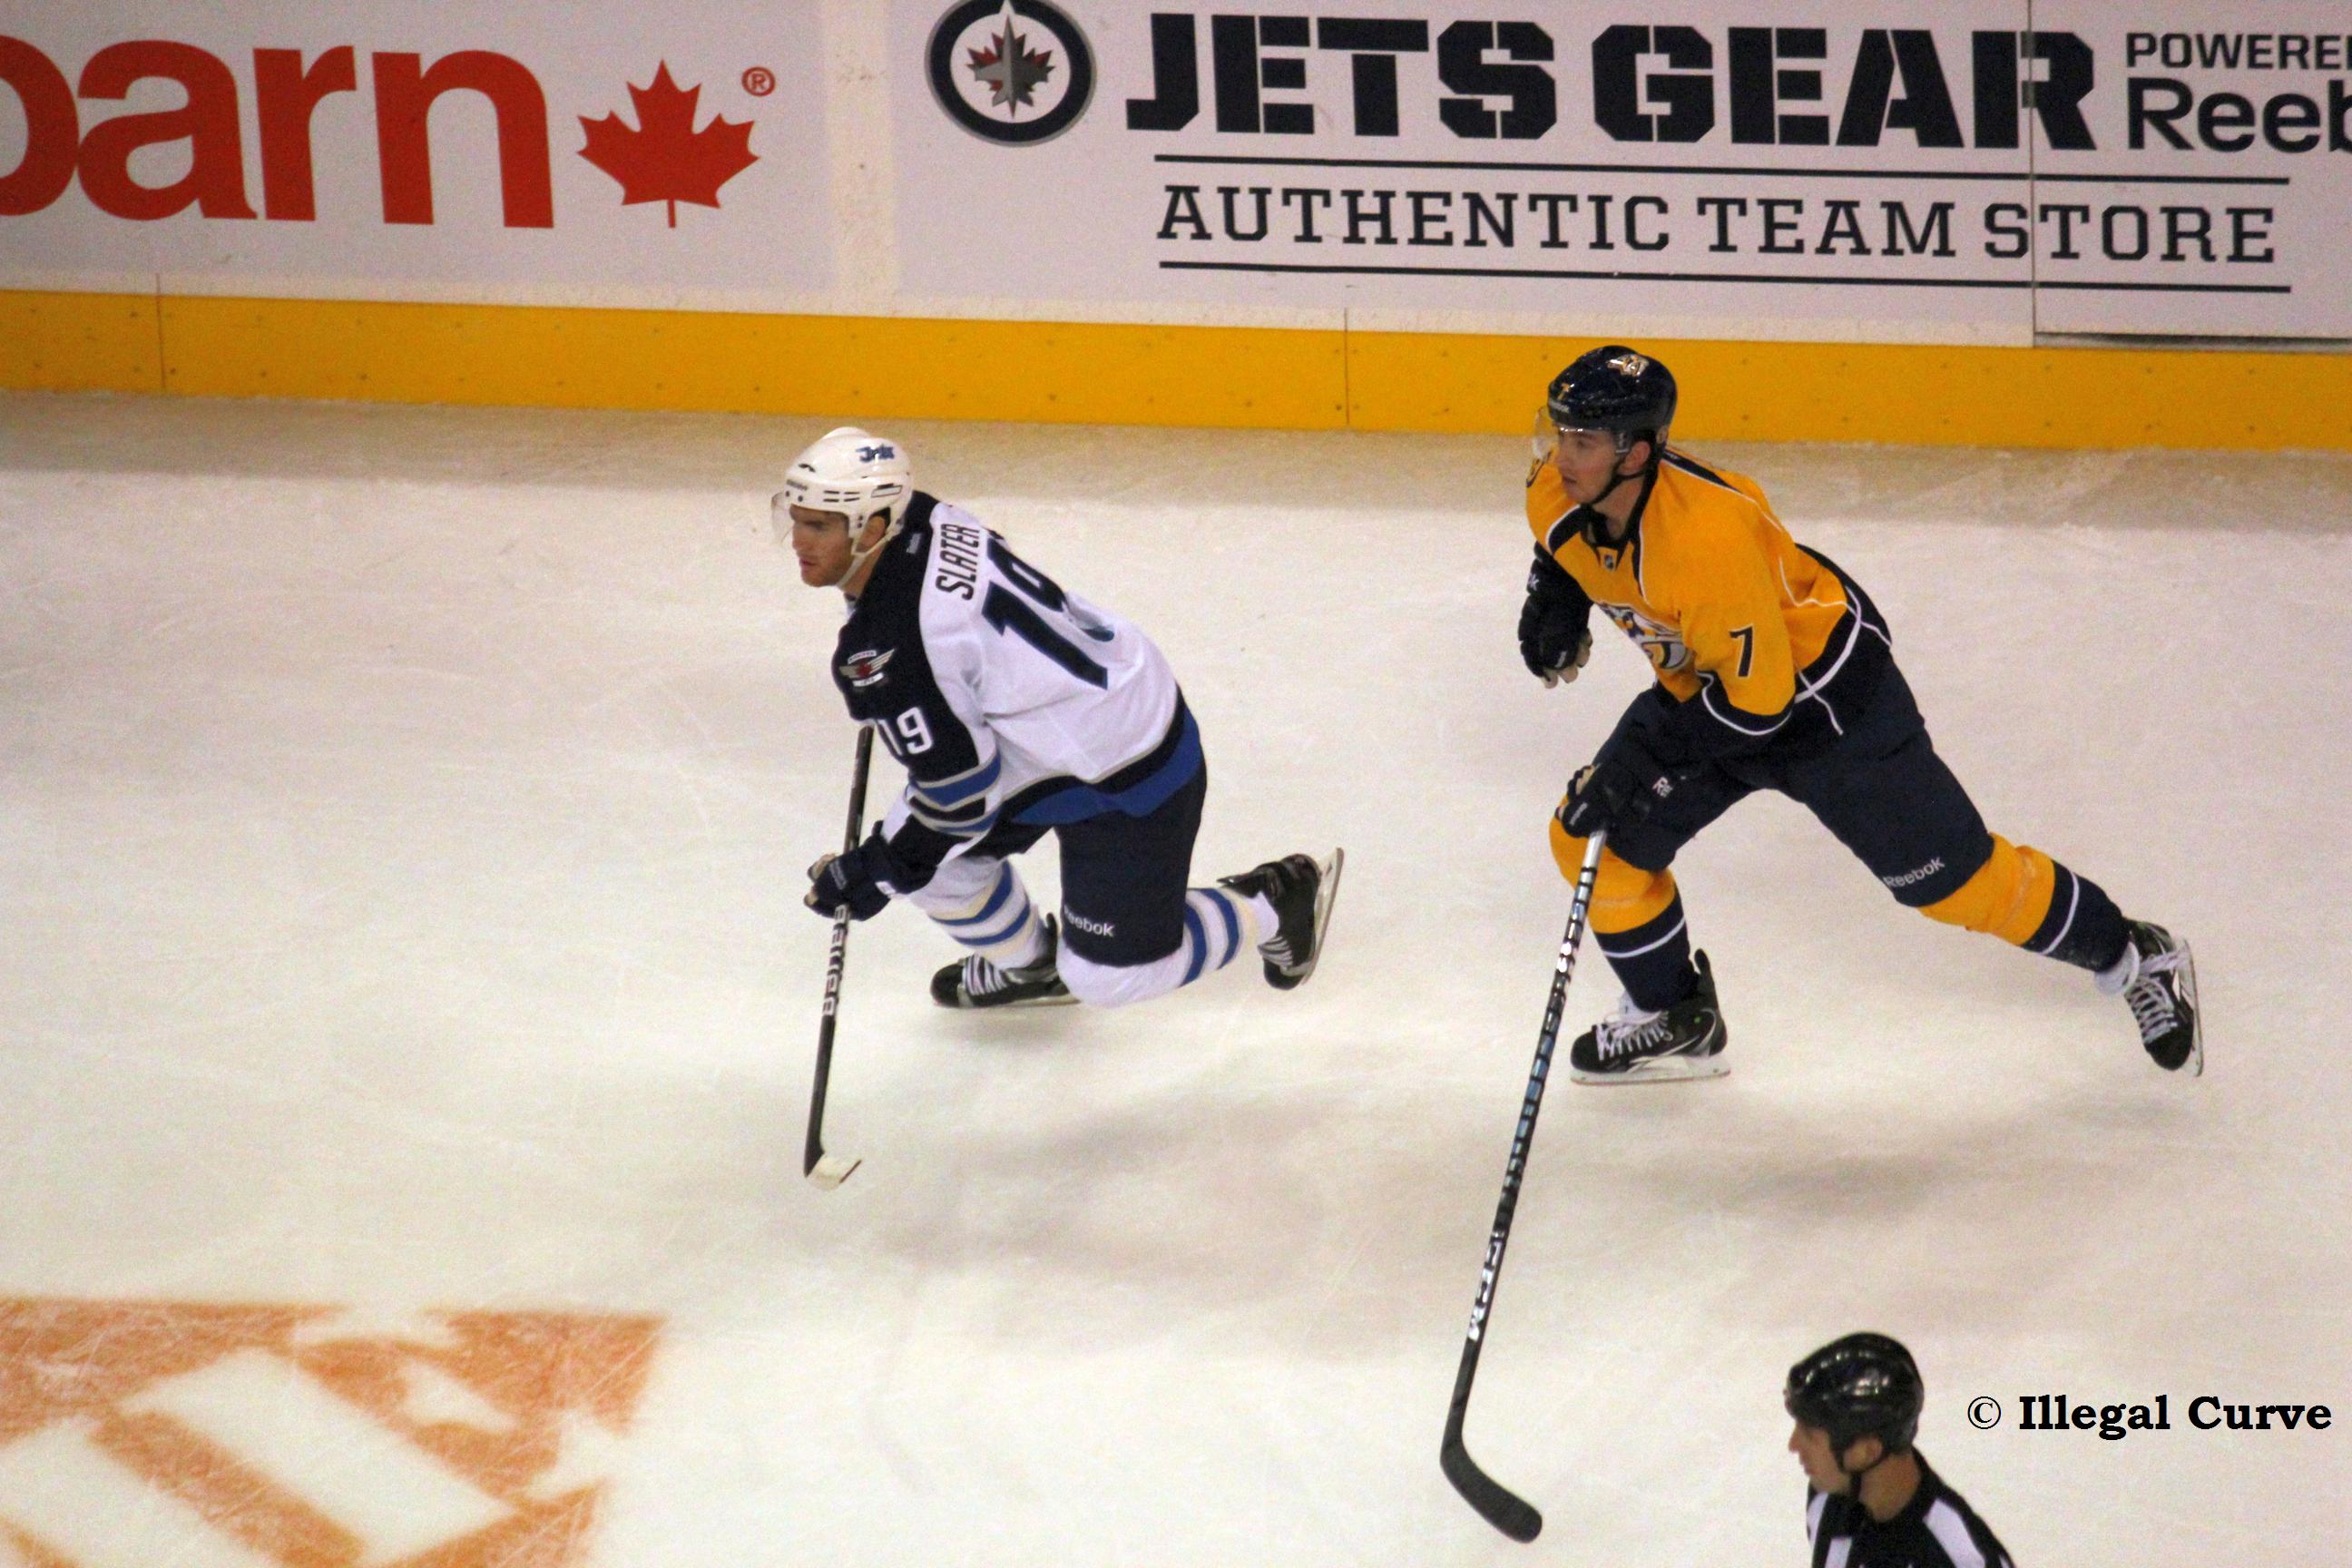 Jets and Preds Slater